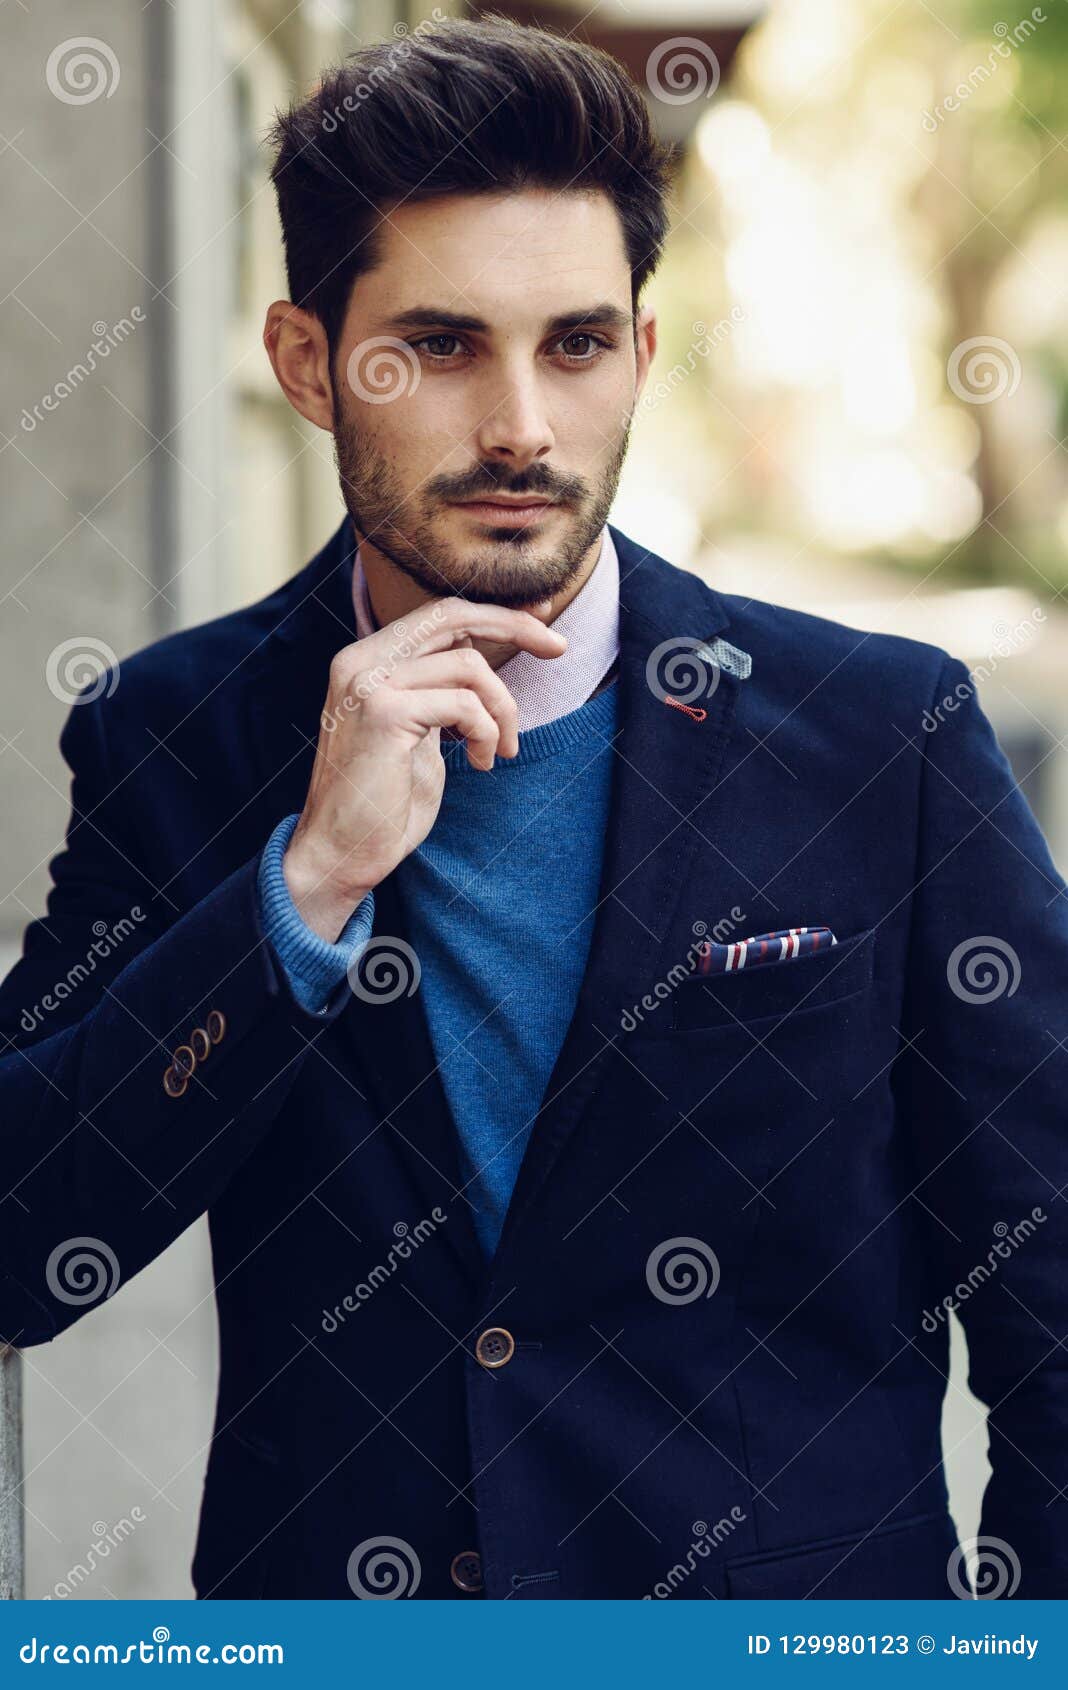 Attractive Man Wearing British Elegant Suit in the Street. Modern Hairstyle.  Stock Image - Image of male, streetstyle: 129980123